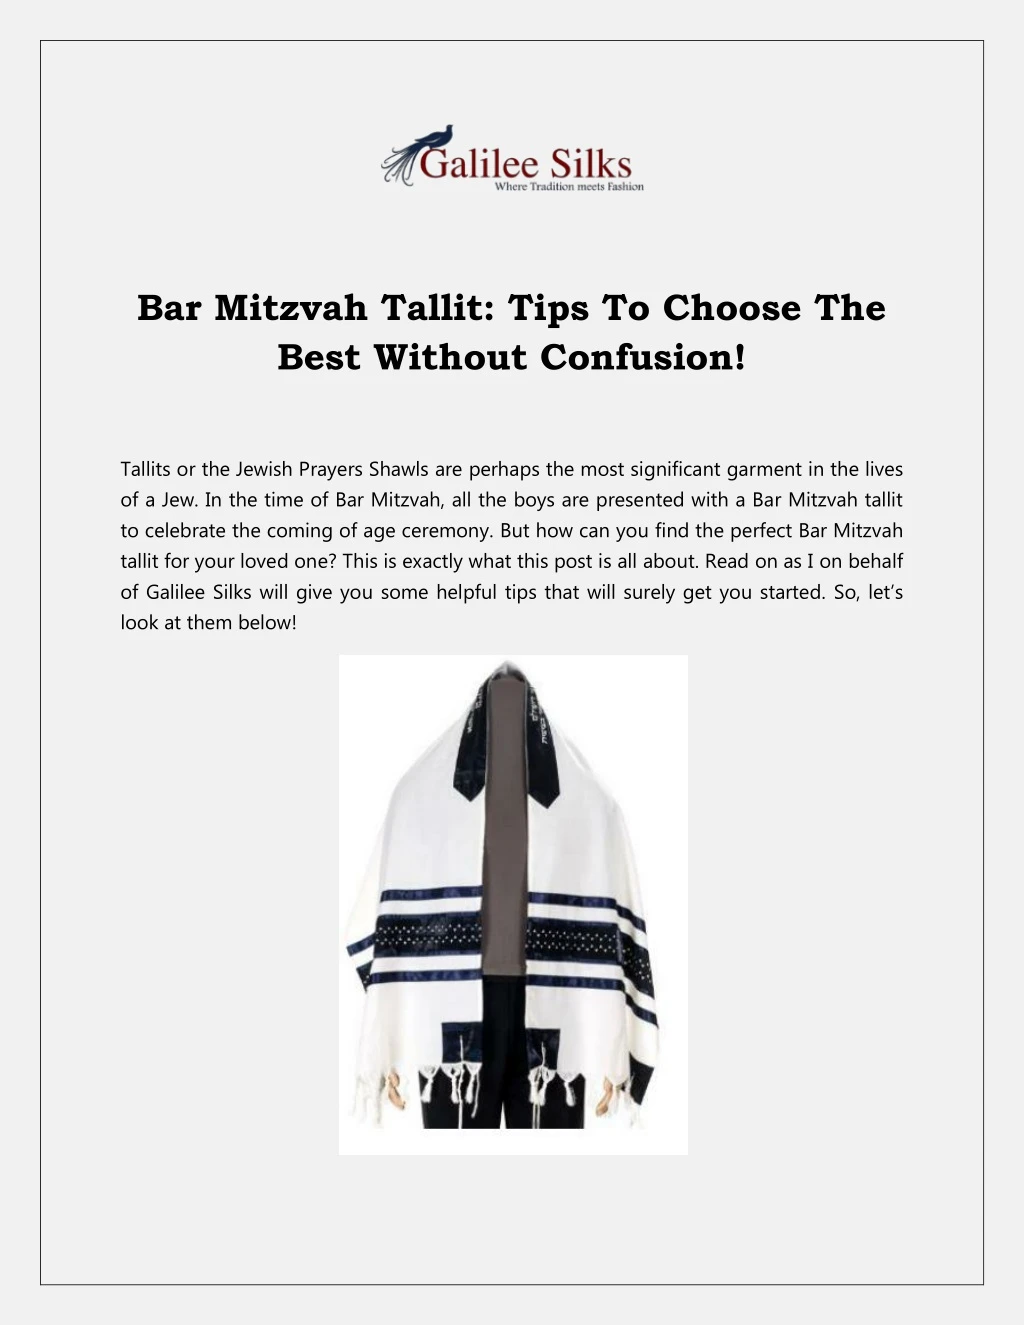 bar mitzvah tallit tips to choose the best